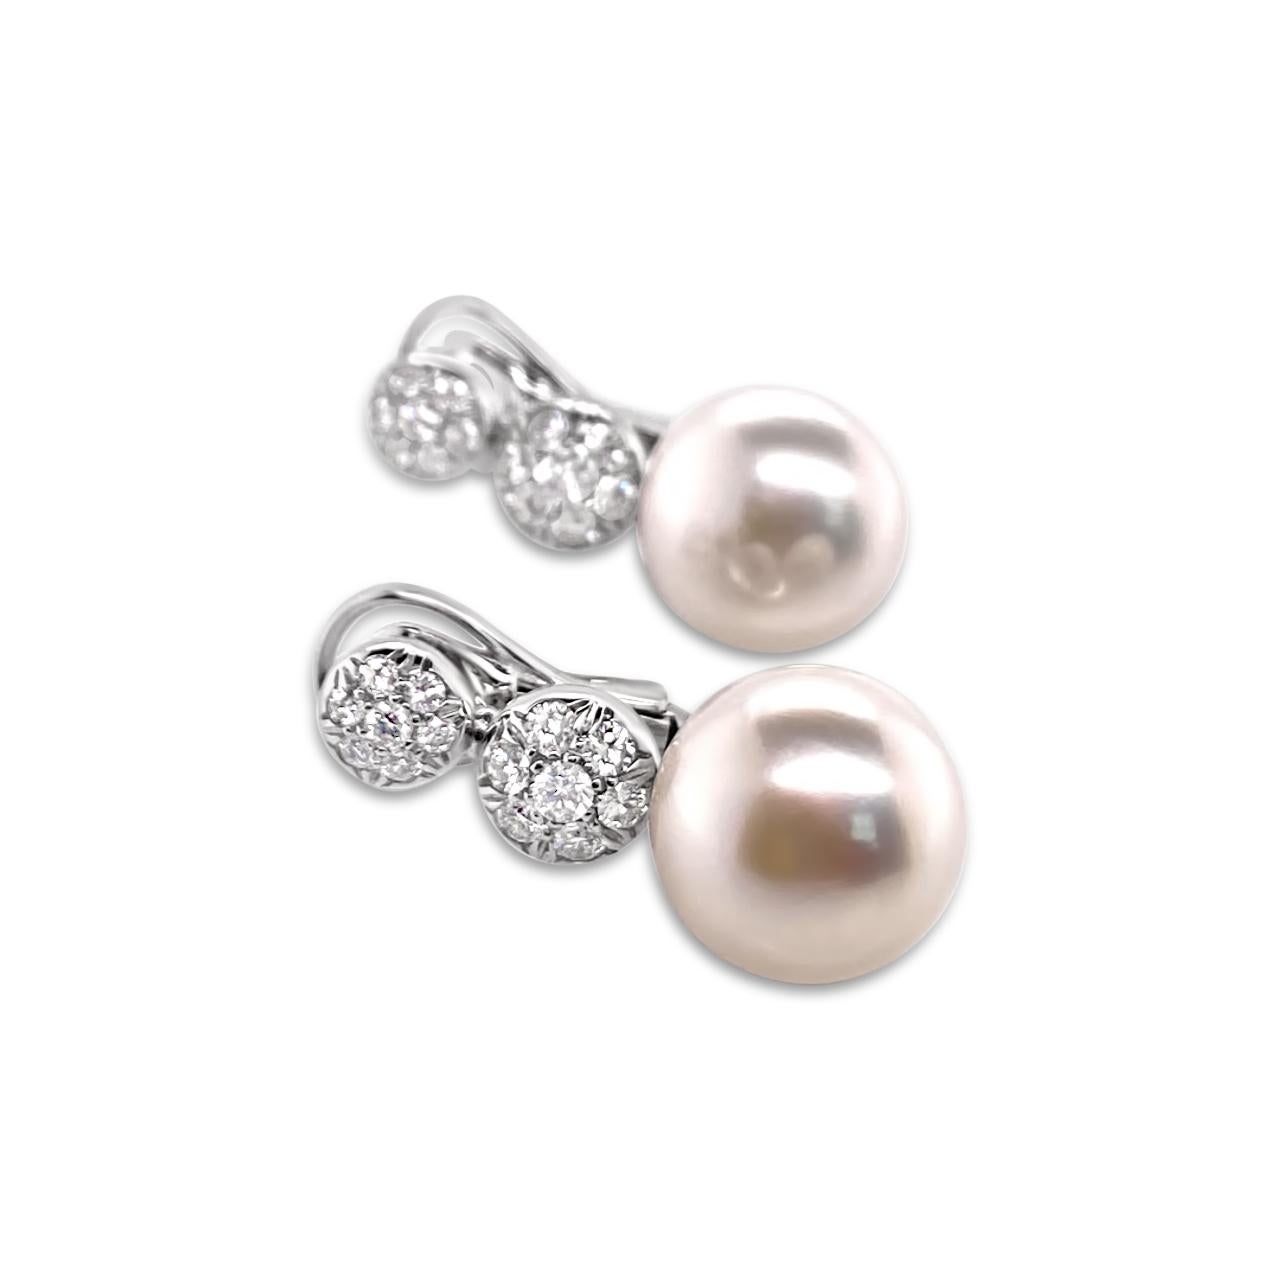 18K White Gold Freshwater Pearl and 0.85 Carat (total weight) Diamond Short Drop Earrings in style 'Bon Bon' by Italian jeweler Chantecler.